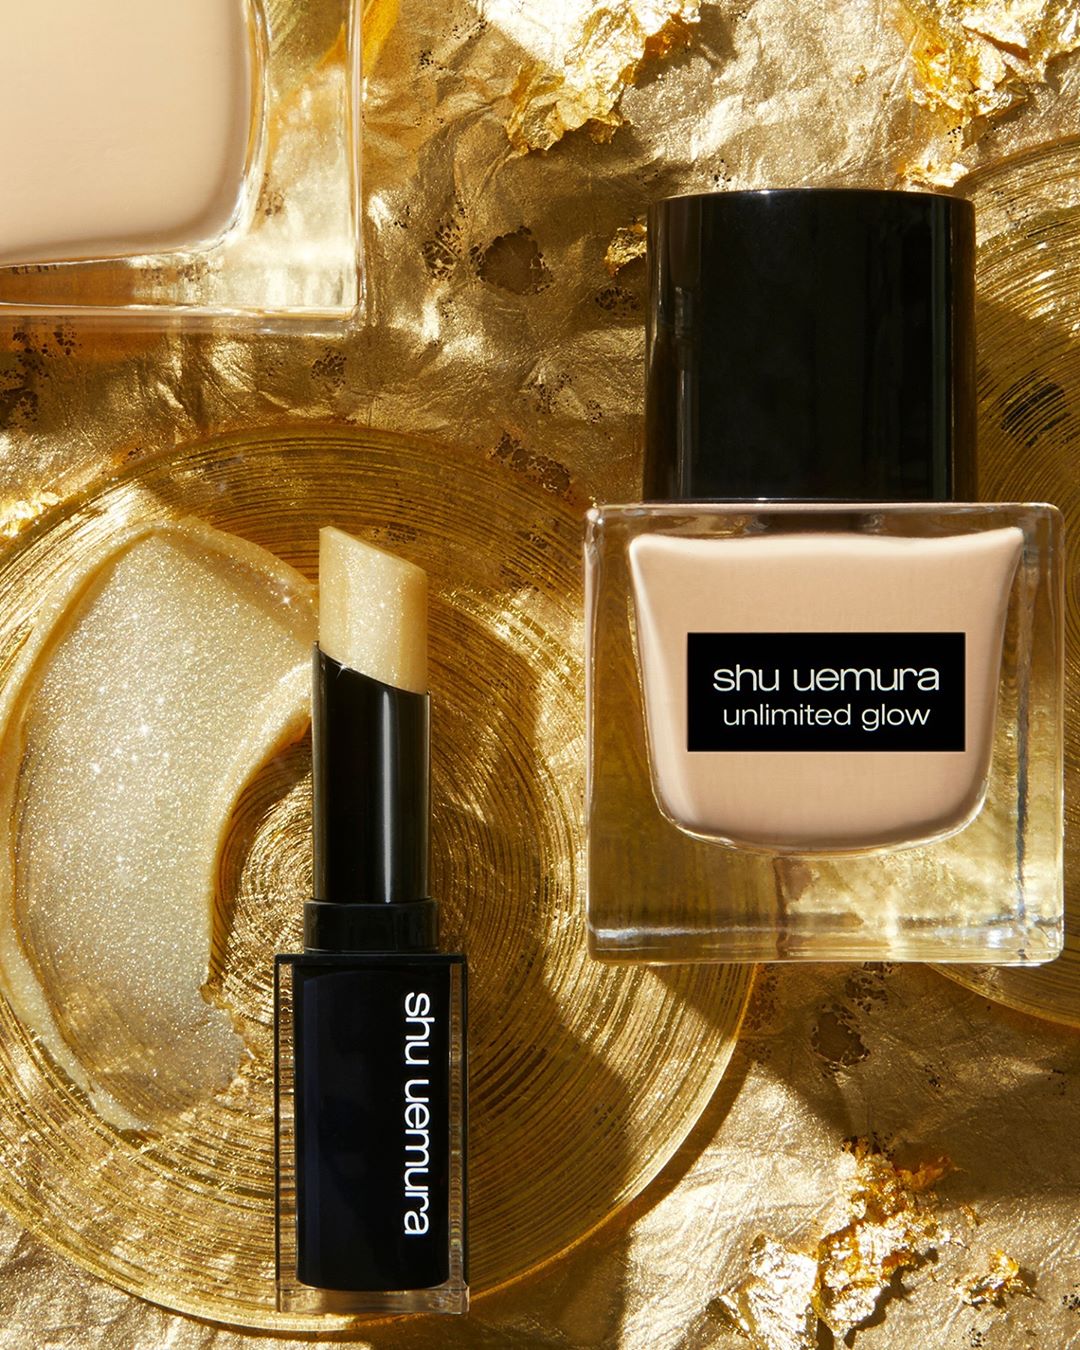 shu uemura - ready, set, glow! in just a few simple steps with unlimited foundation glow and rouge unlimited “glitter”. ✨🕓 #shuuemura #unlimitedfoundation #rougeunlimited⁠